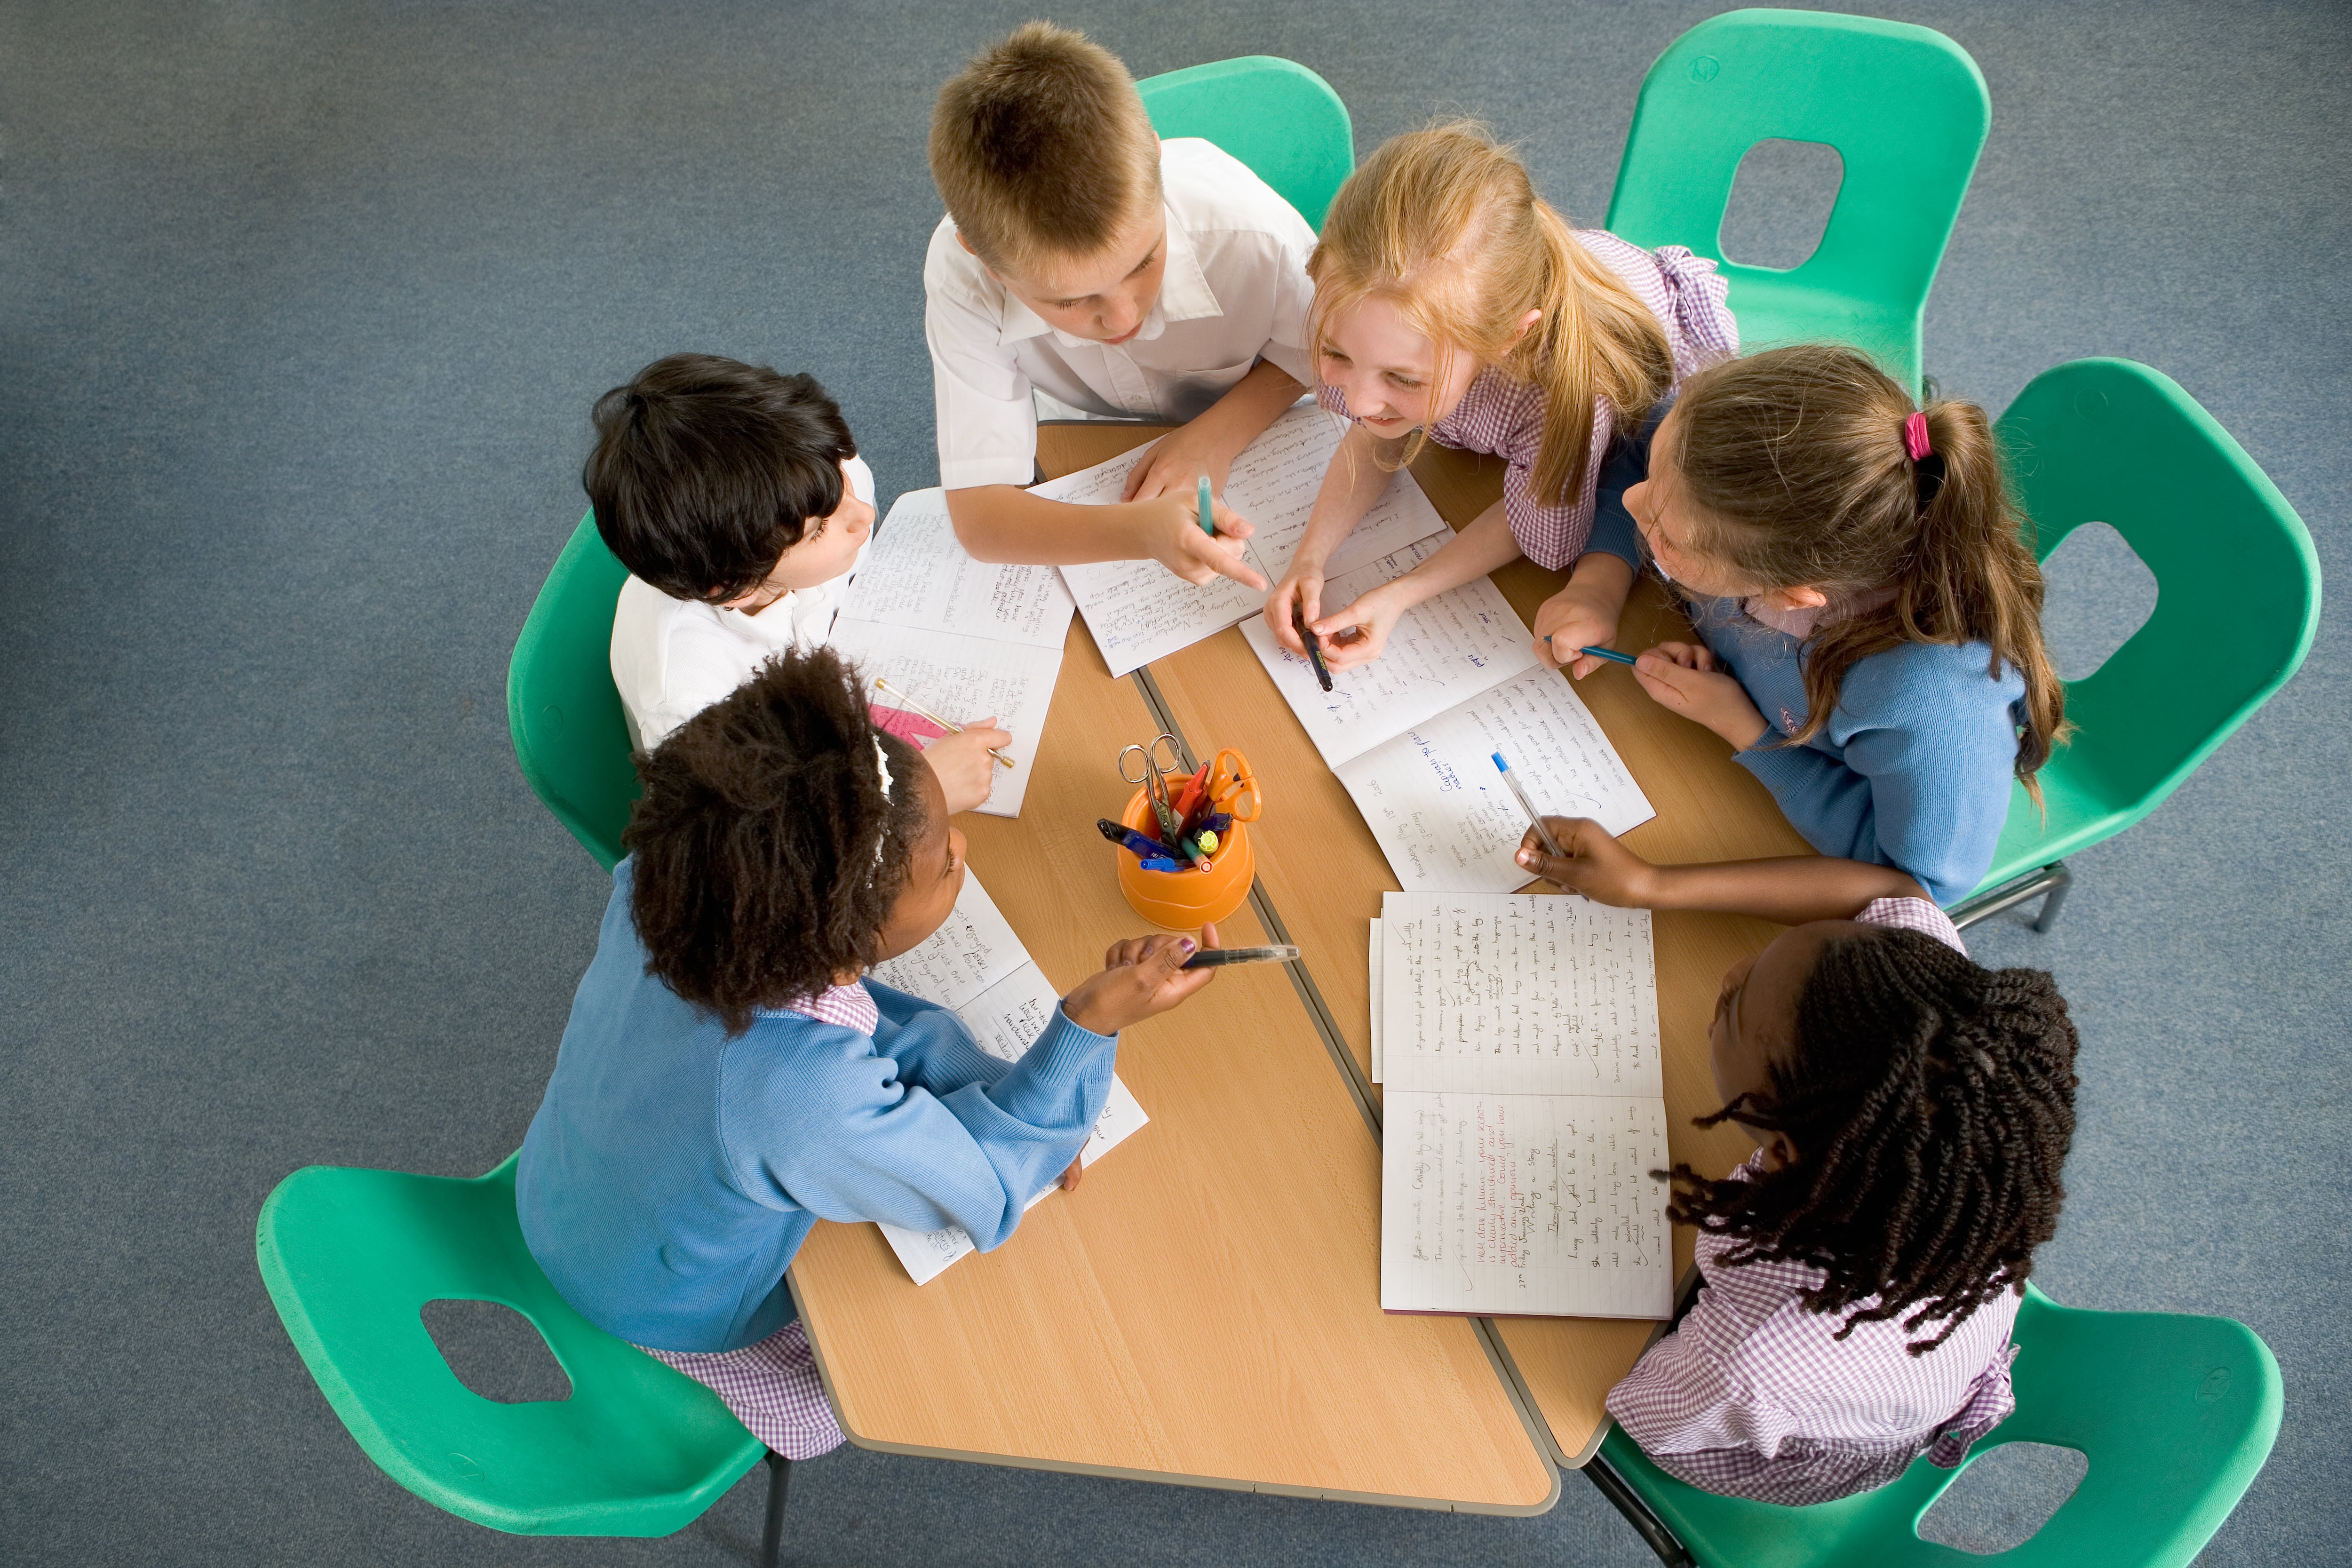 Children (7-12) sitting around table, having discussion, elevated view - stock photo